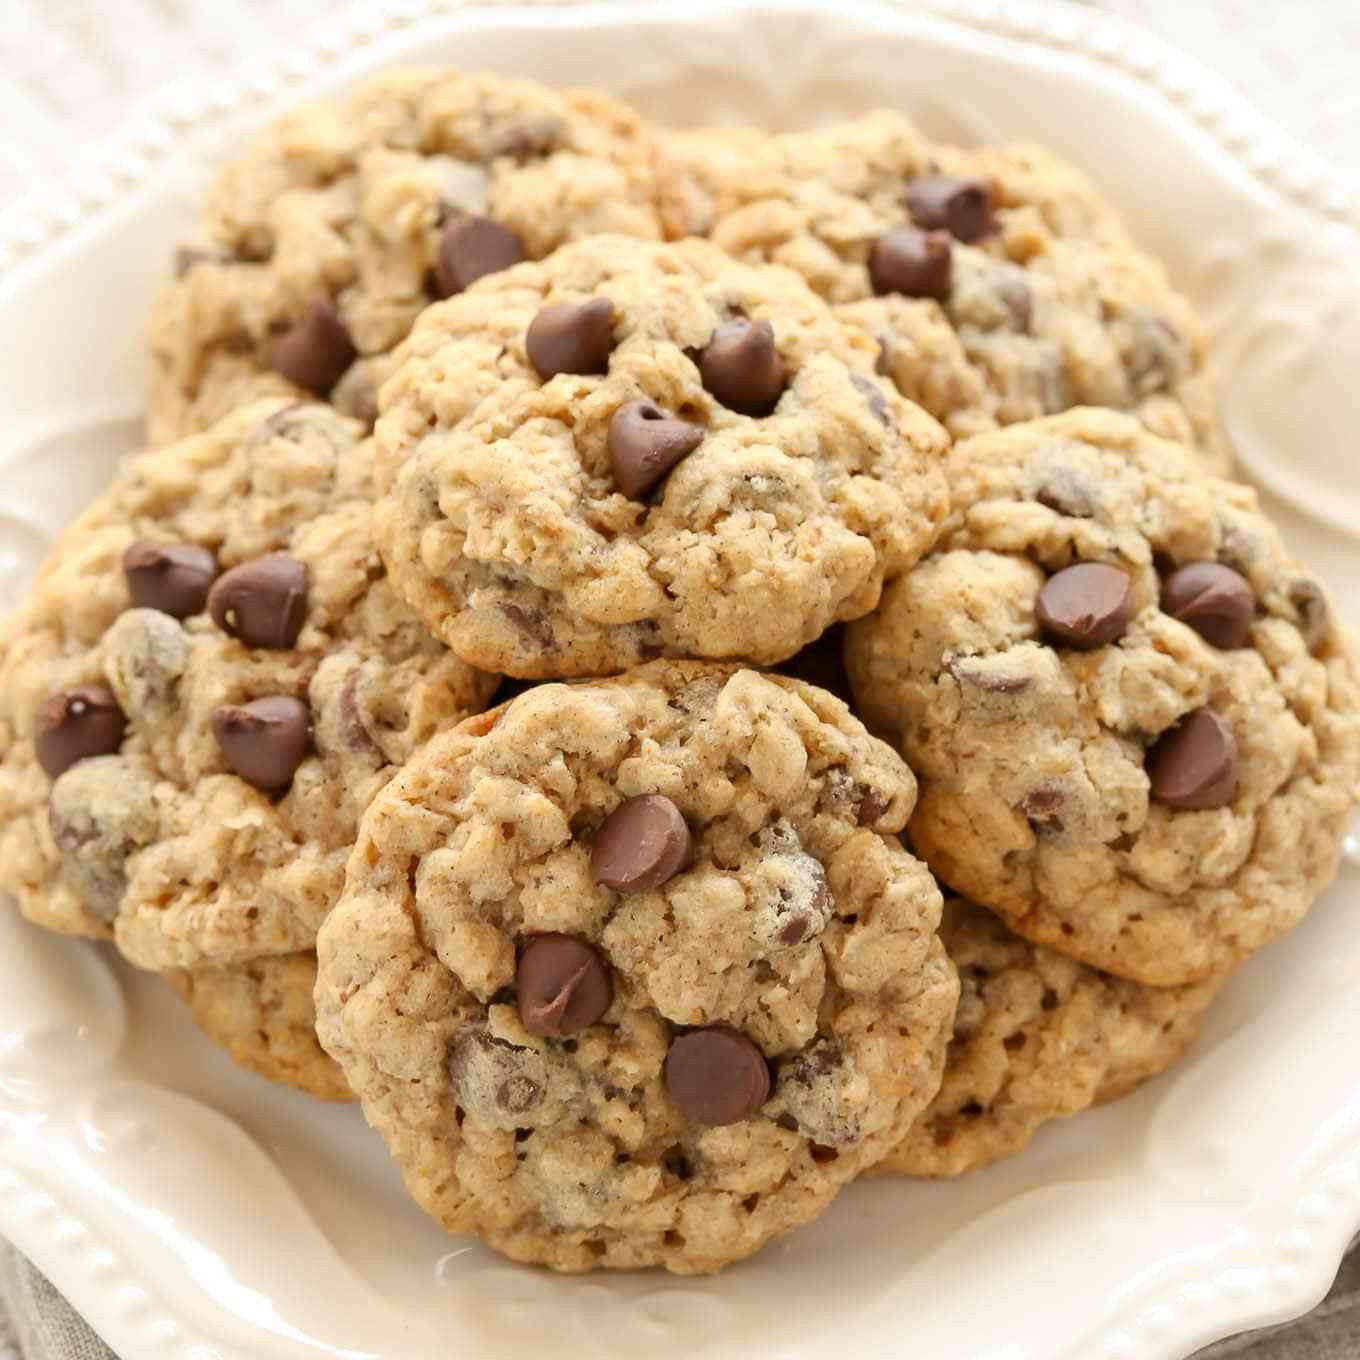 Recipes For Oatmeal Cookies
 Soft and Chewy Oatmeal Chocolate Chip Cookies Live Well